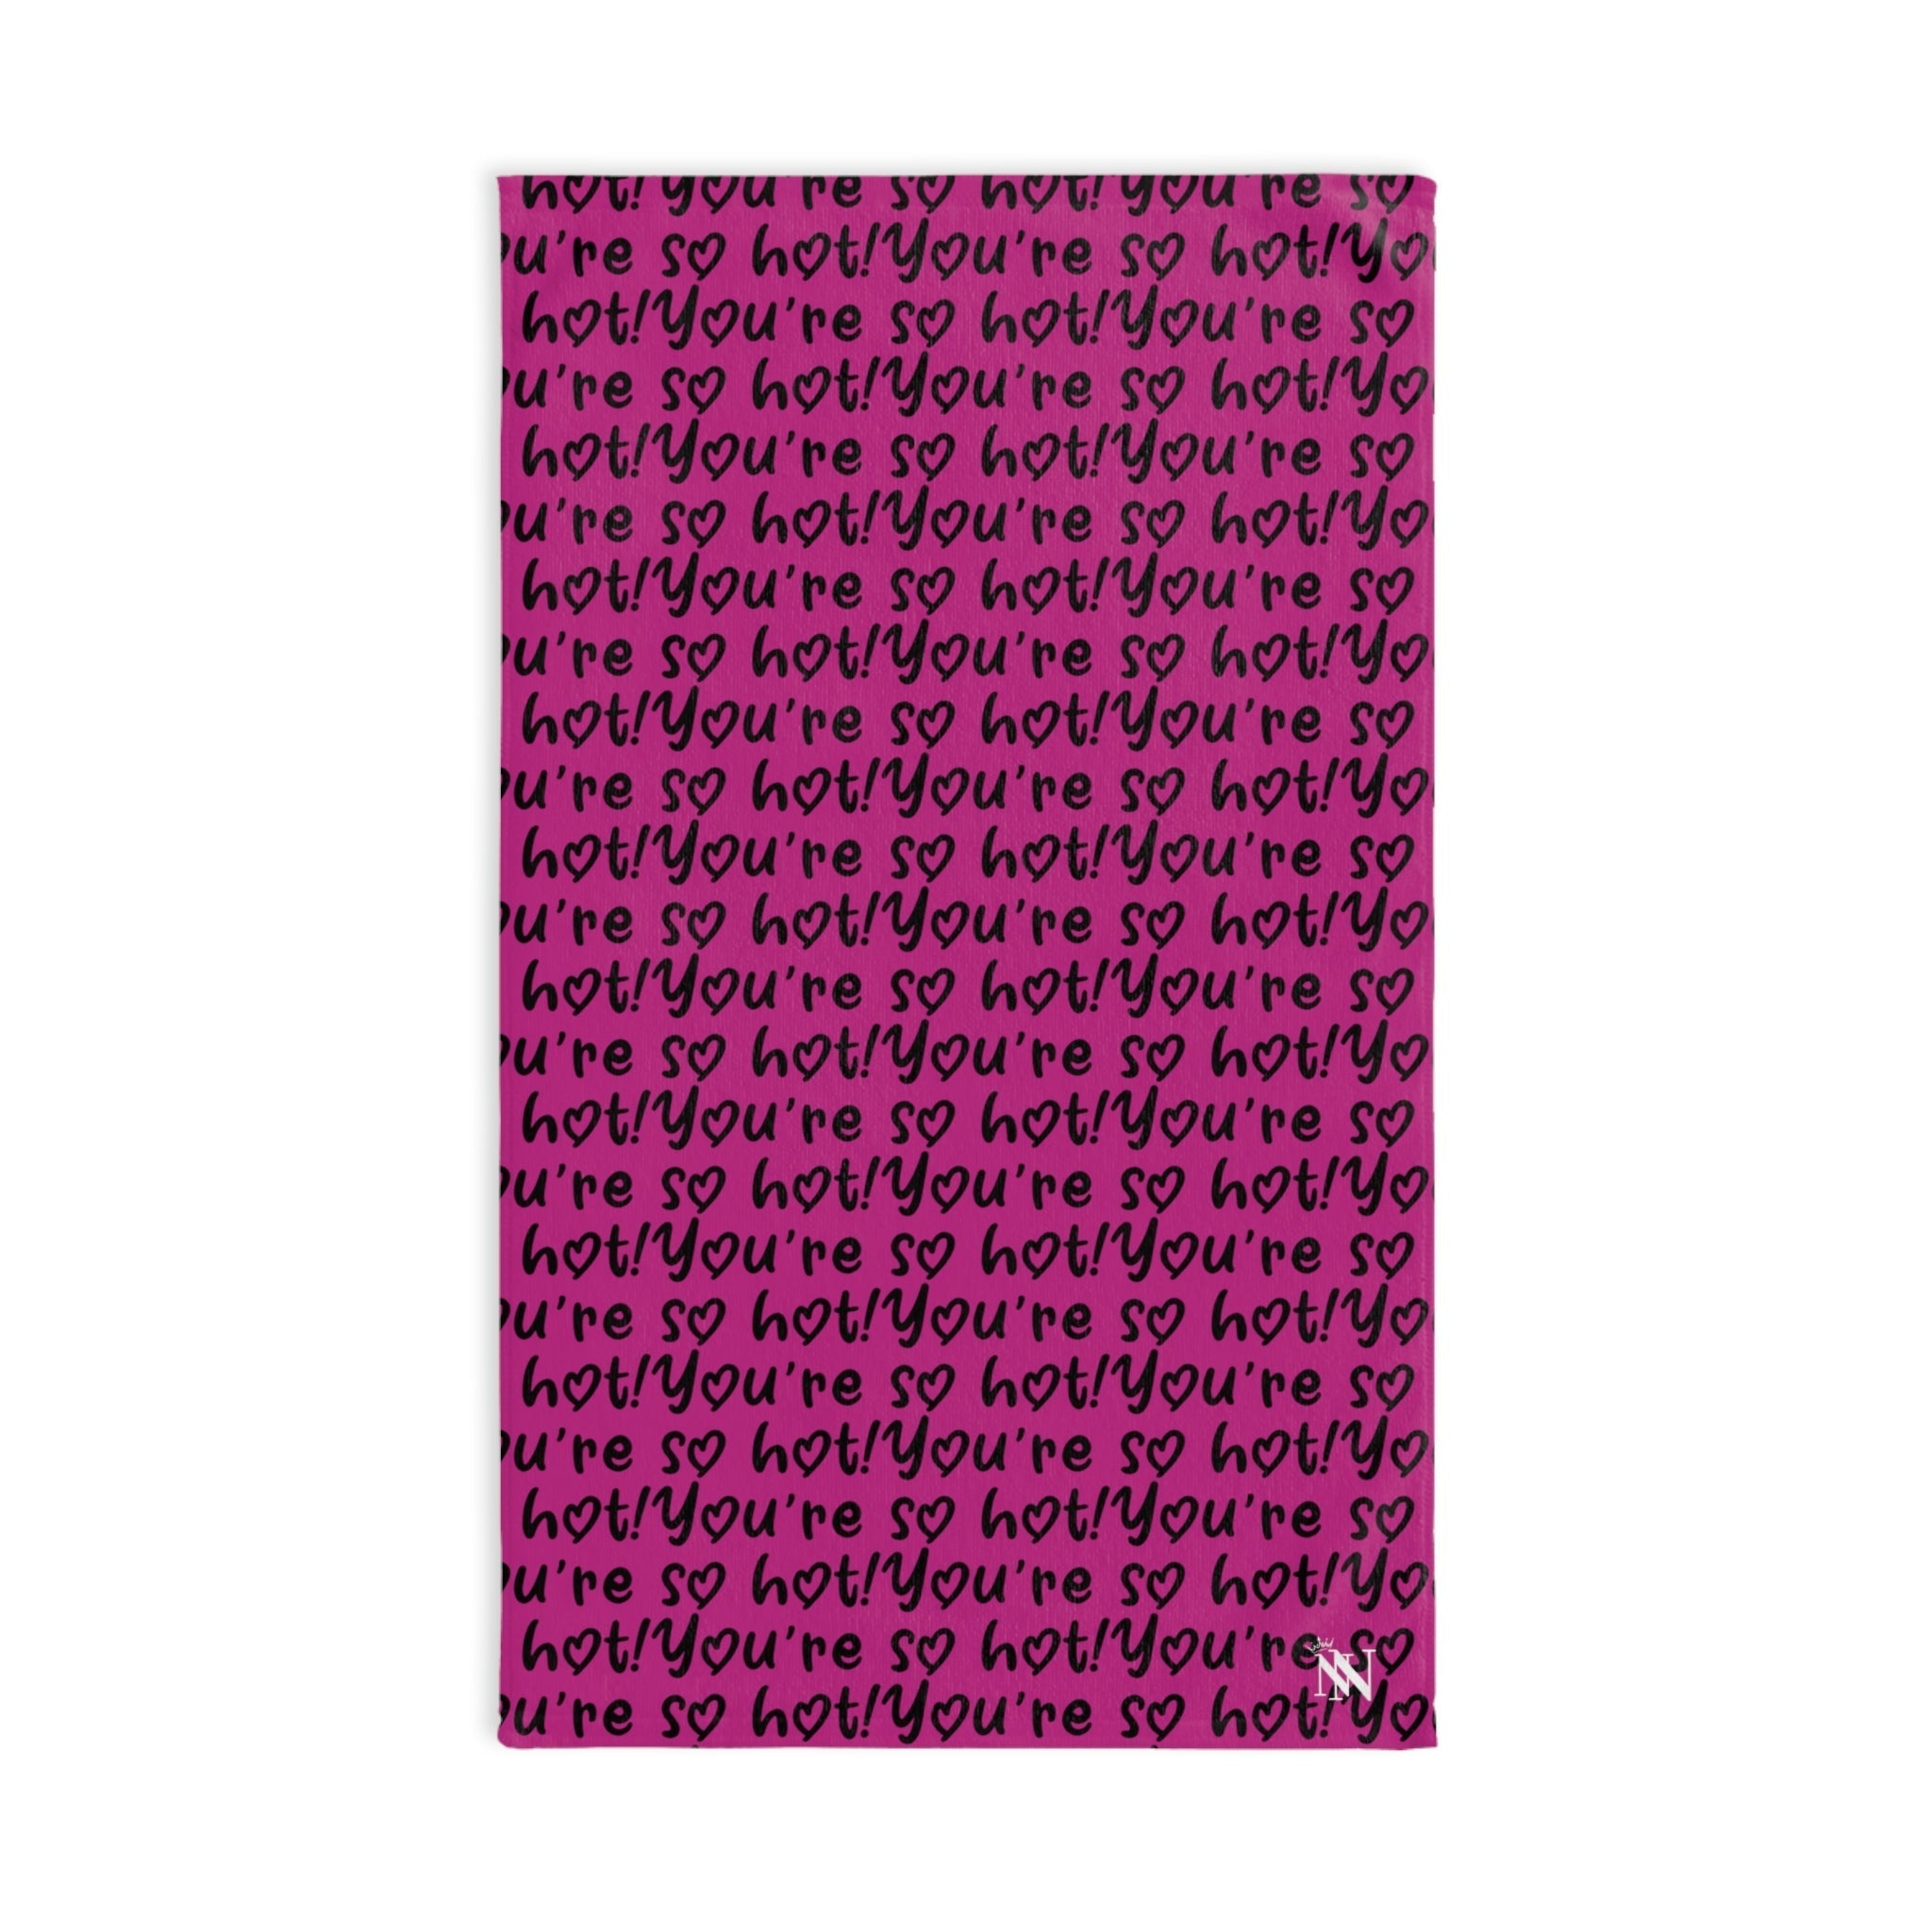 Hot Pattern You So Fuscia | Funny Gifts for Men - Gifts for Him - Birthday Gifts for Men, Him, Husband, Boyfriend, New Couple Gifts, Fathers & Valentines Day Gifts, Hand Towels NECTAR NAPKINS